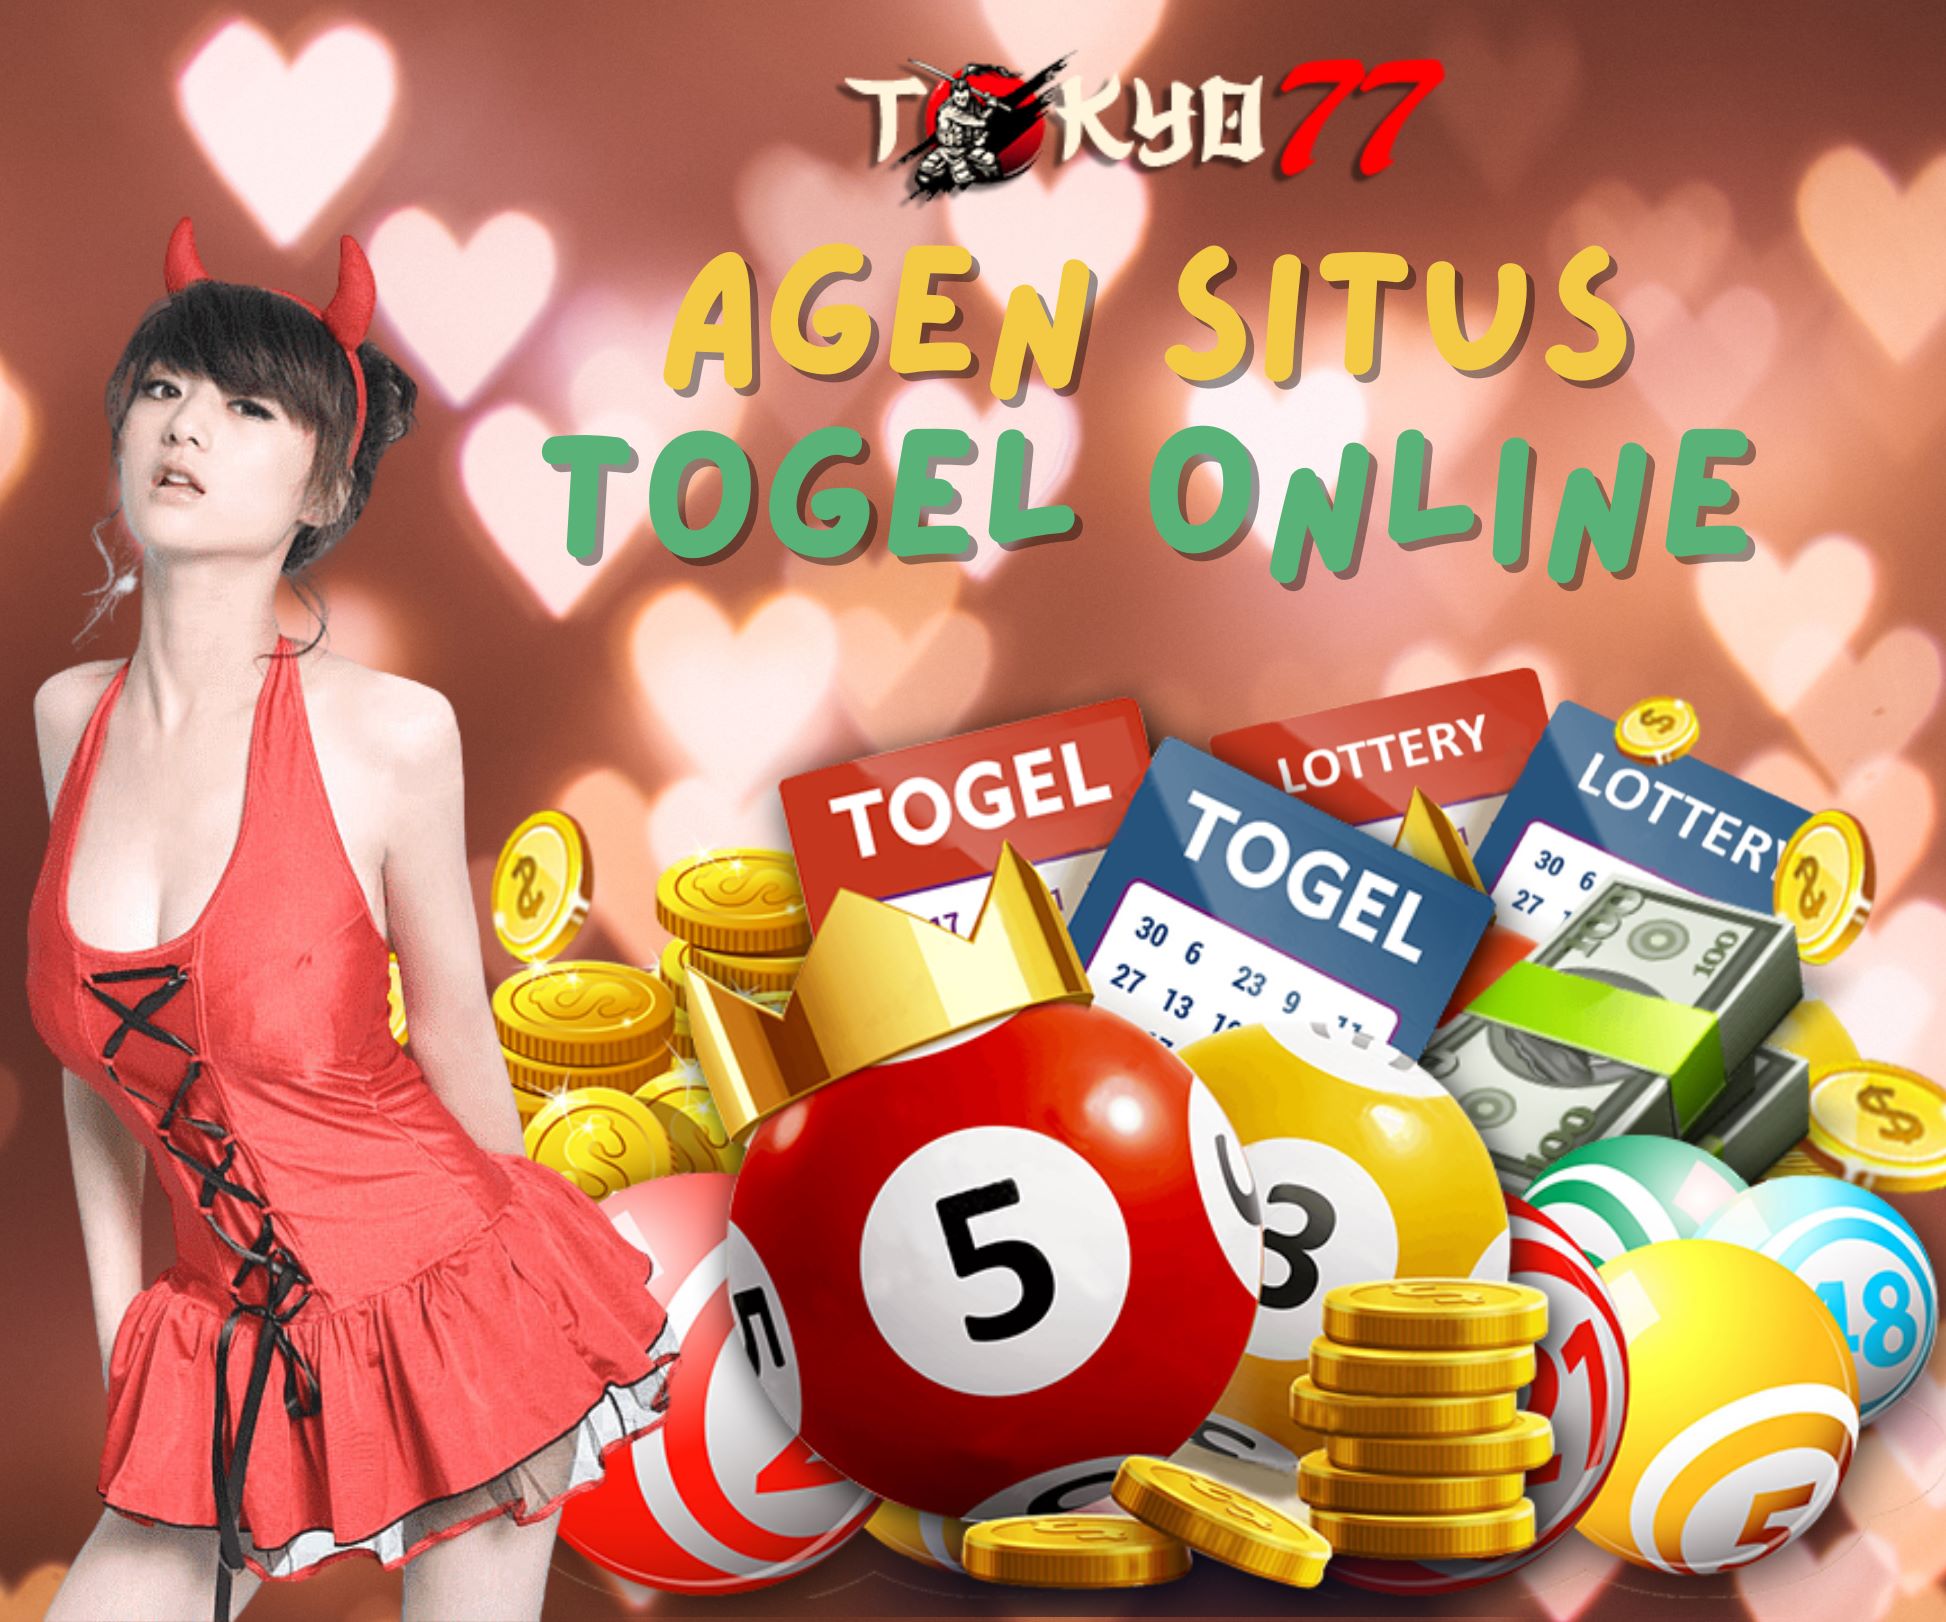 All dreams have meaning that can be bet on TOGEL Online